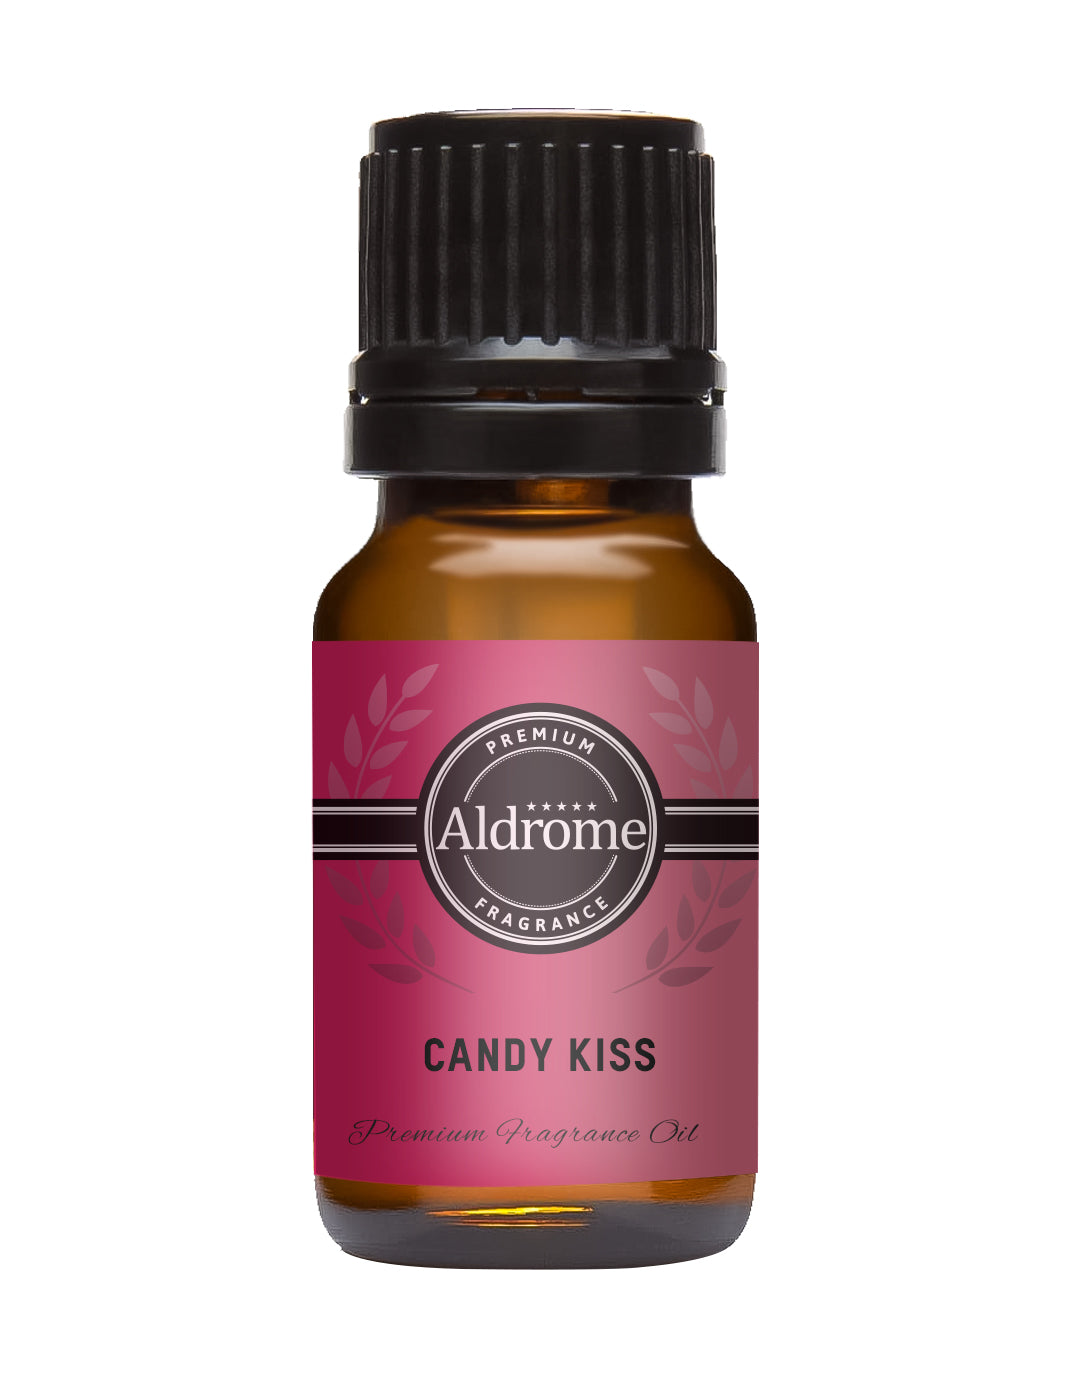 Candy Kiss Fragrance Oil - 10ml | Buy Candy Kiss Fragrance Oil | Aldrome Premium Fragrance Oil